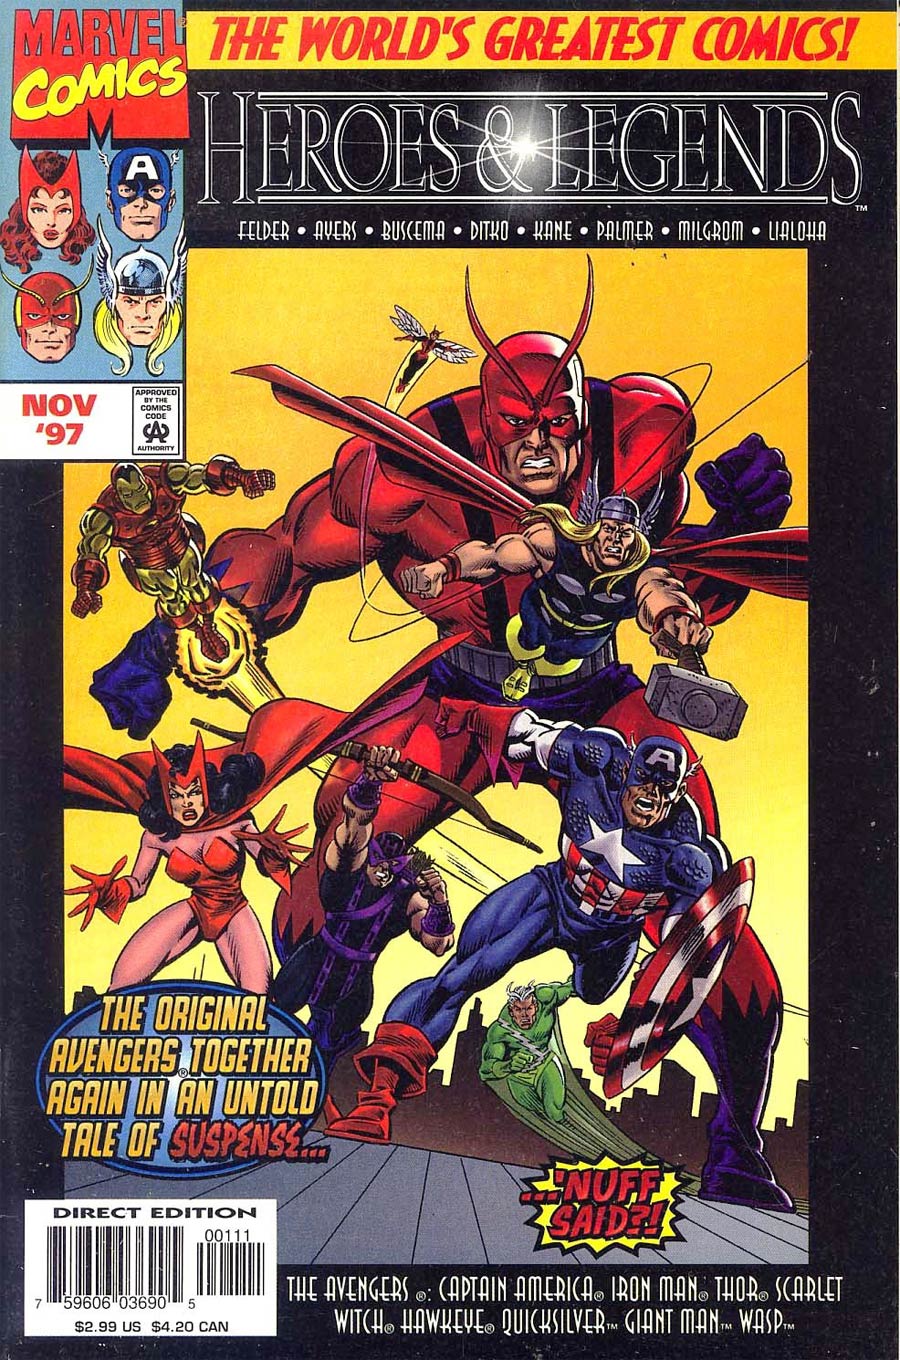 Marvel Heroes And Legends (1997) #1